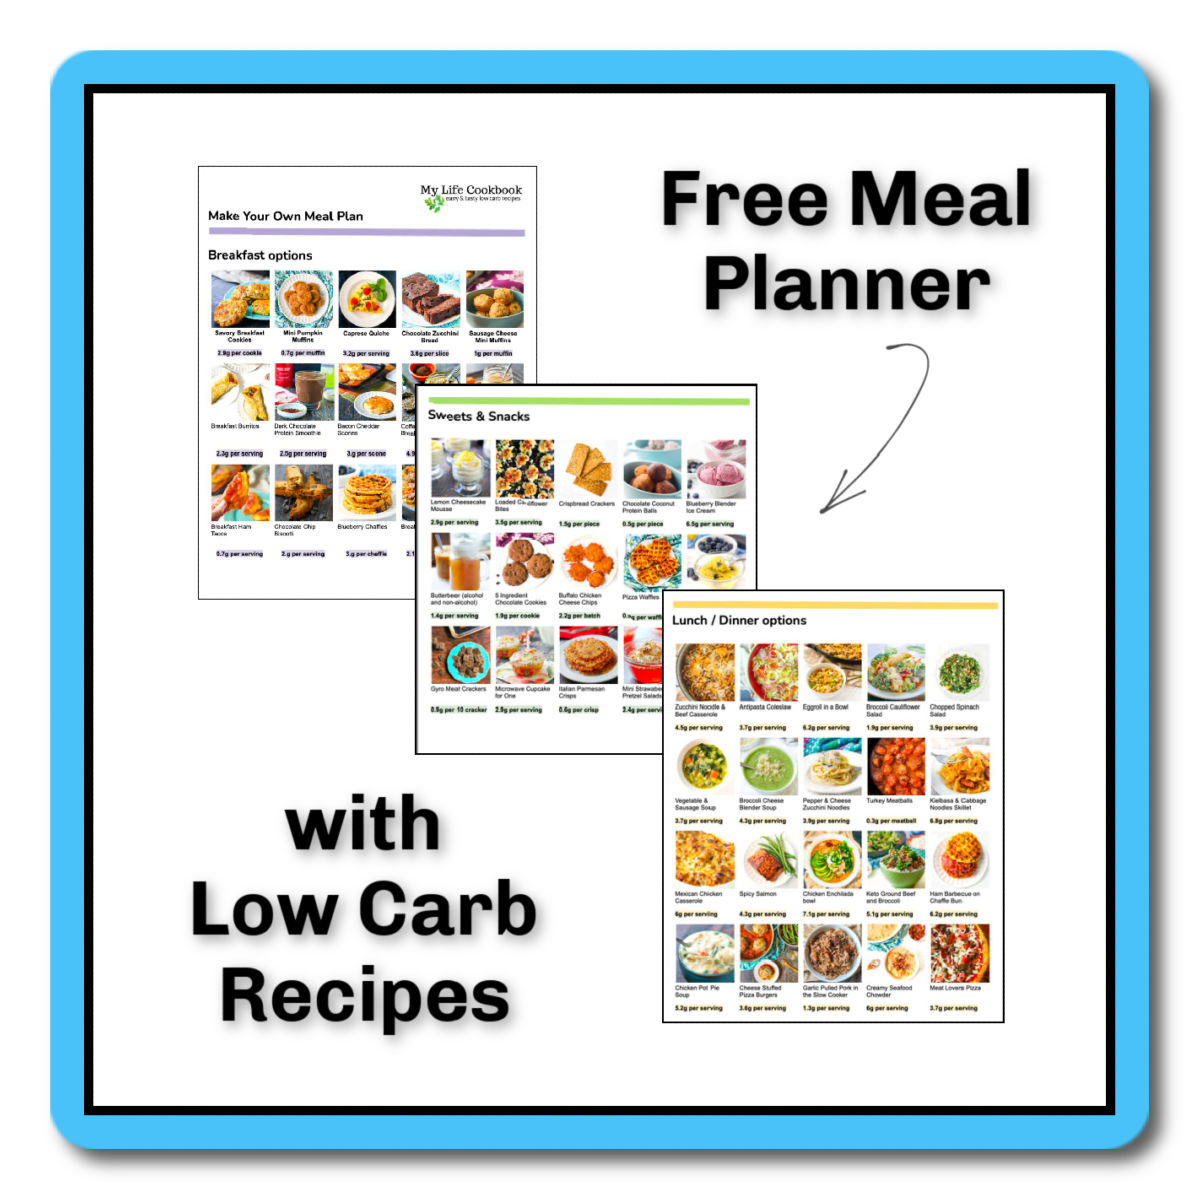 graphic of meal planner pages and text